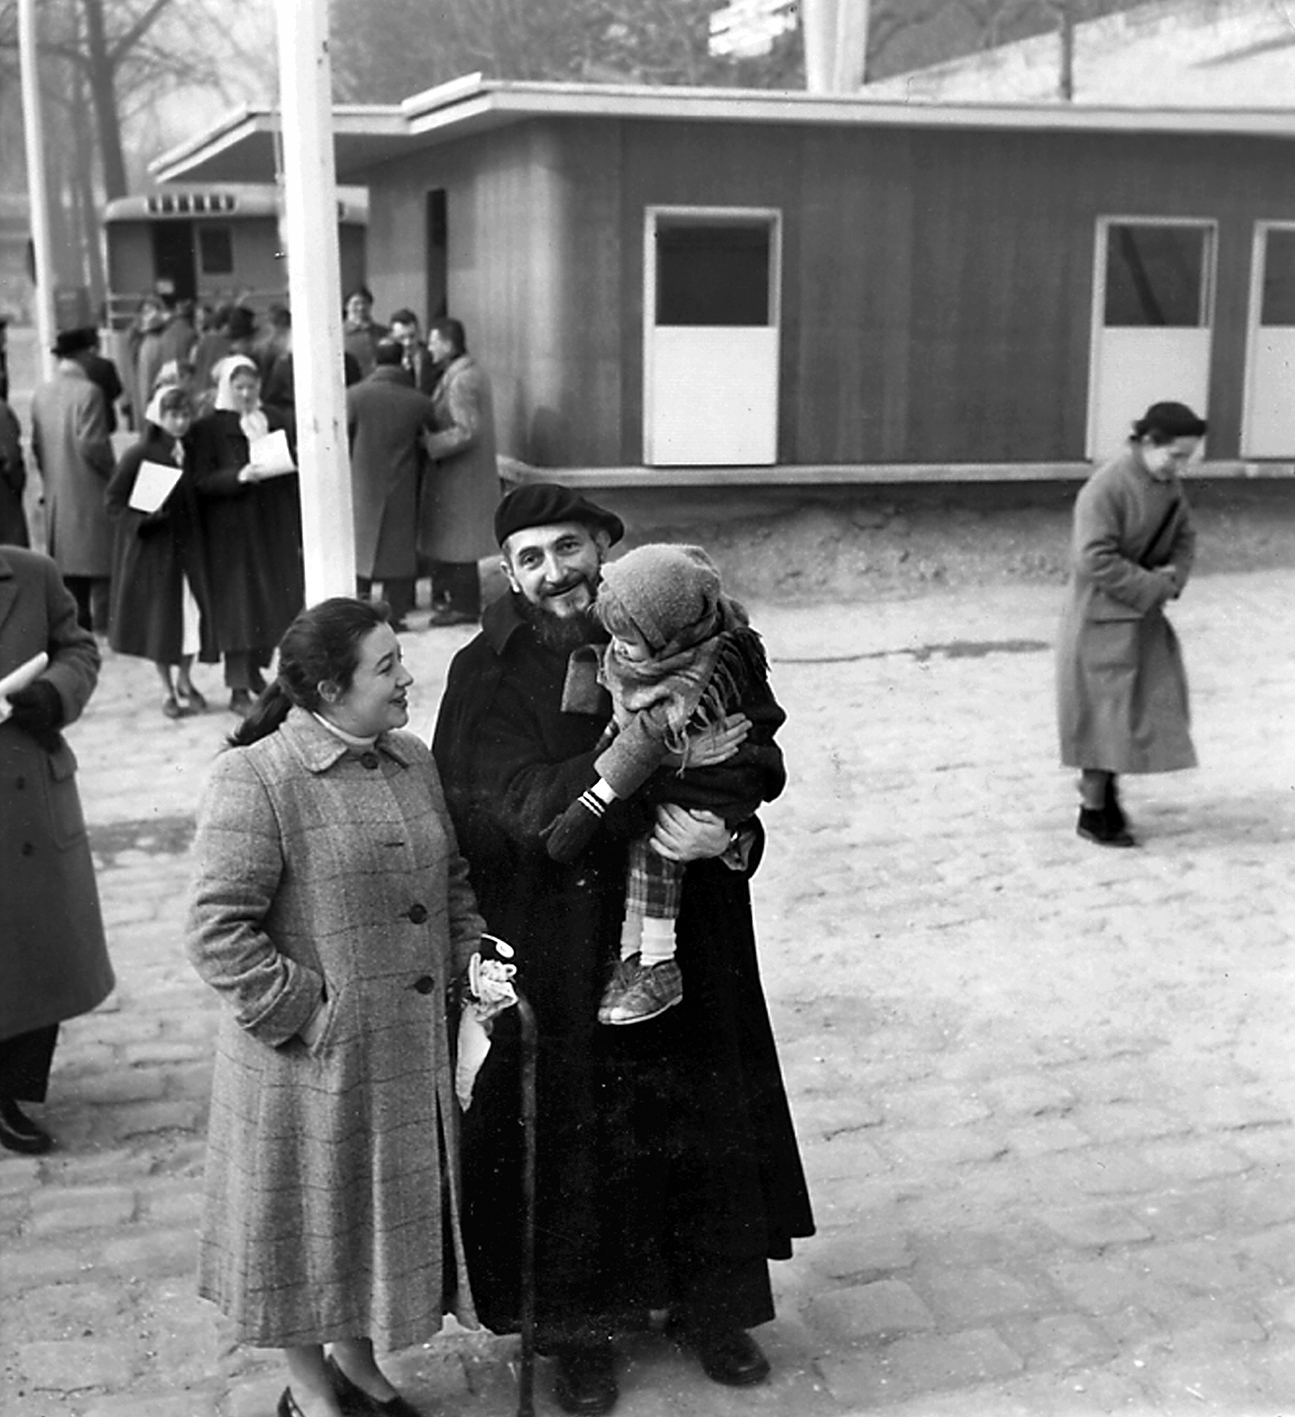 Abbé Pierre outside the Jours Meilleurs demountable house with the family it was constructed for, Quai Alexandre-III, Paris, February 1956.